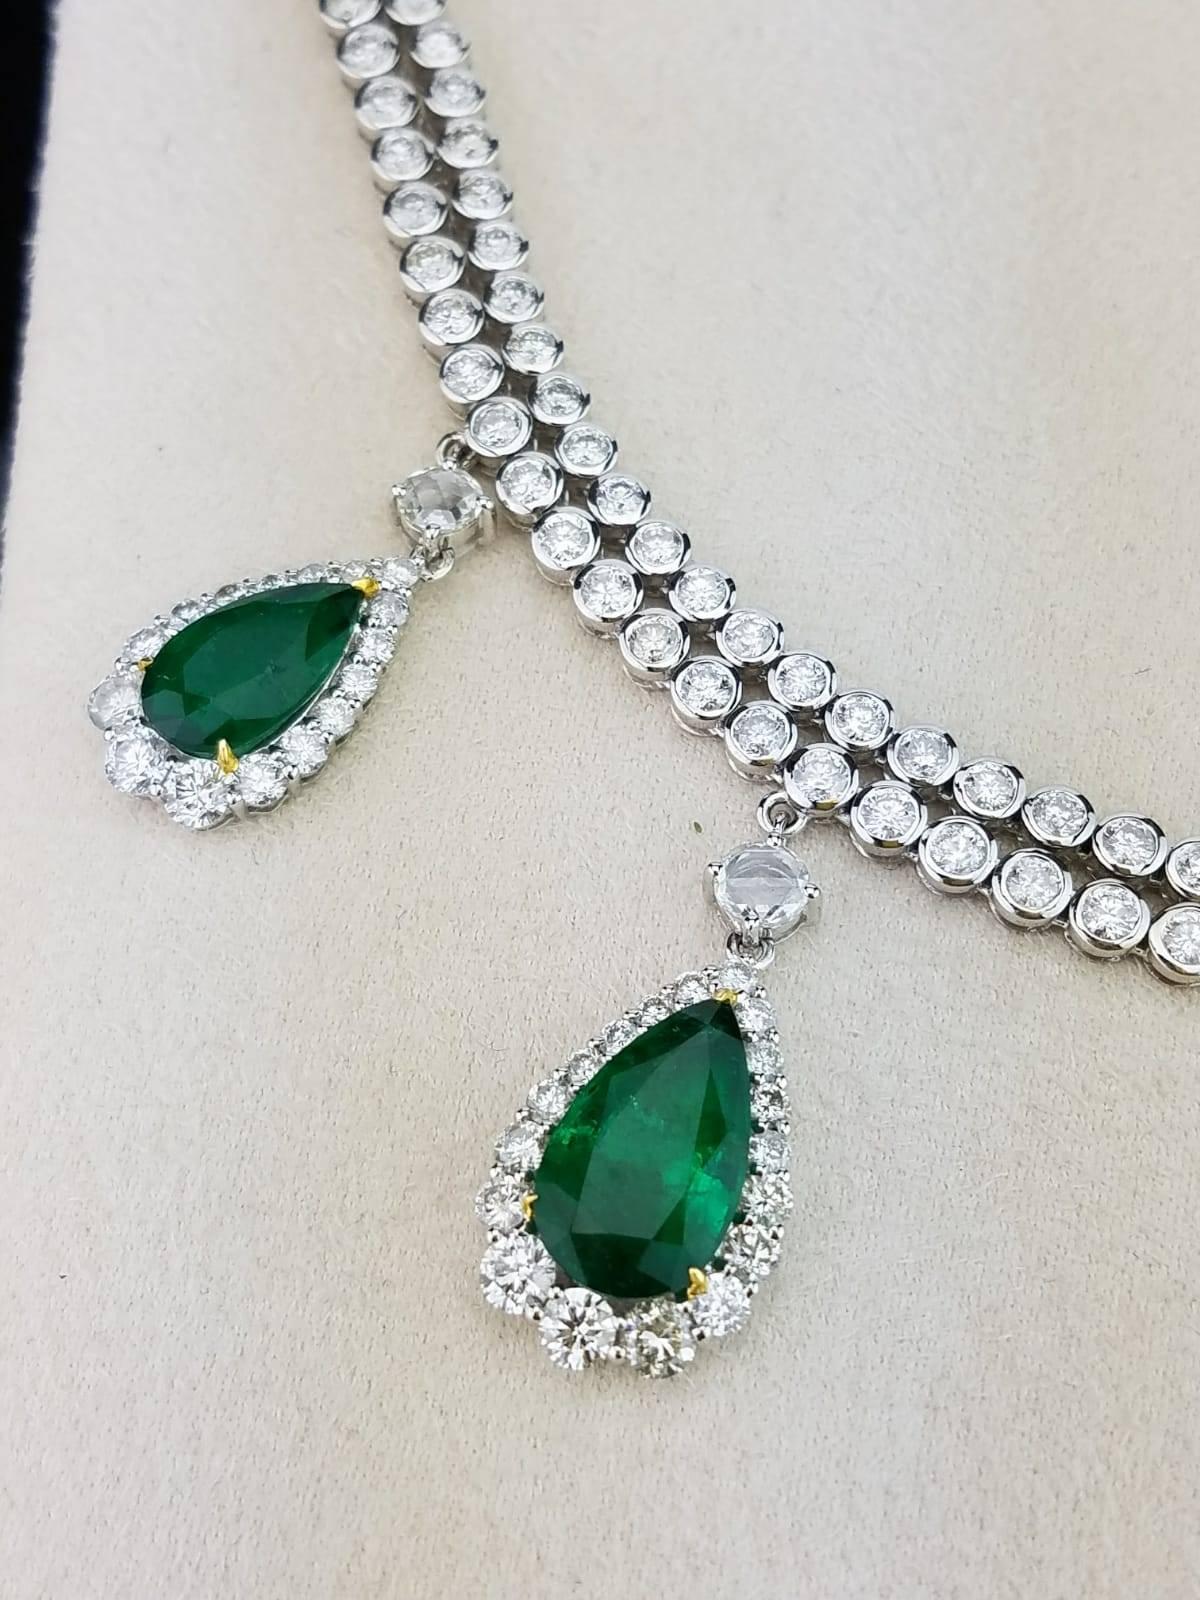 An extremely elegant pear shape Zambian Emeralds and Diamond necklace, all set in 18K white gold. Matching earring and ring can be made to order.

Stone Details:
Stone: Zambian Emerald 
Shape: Pear
Weight:  16.74 carats

Diamond Details:
Weight: